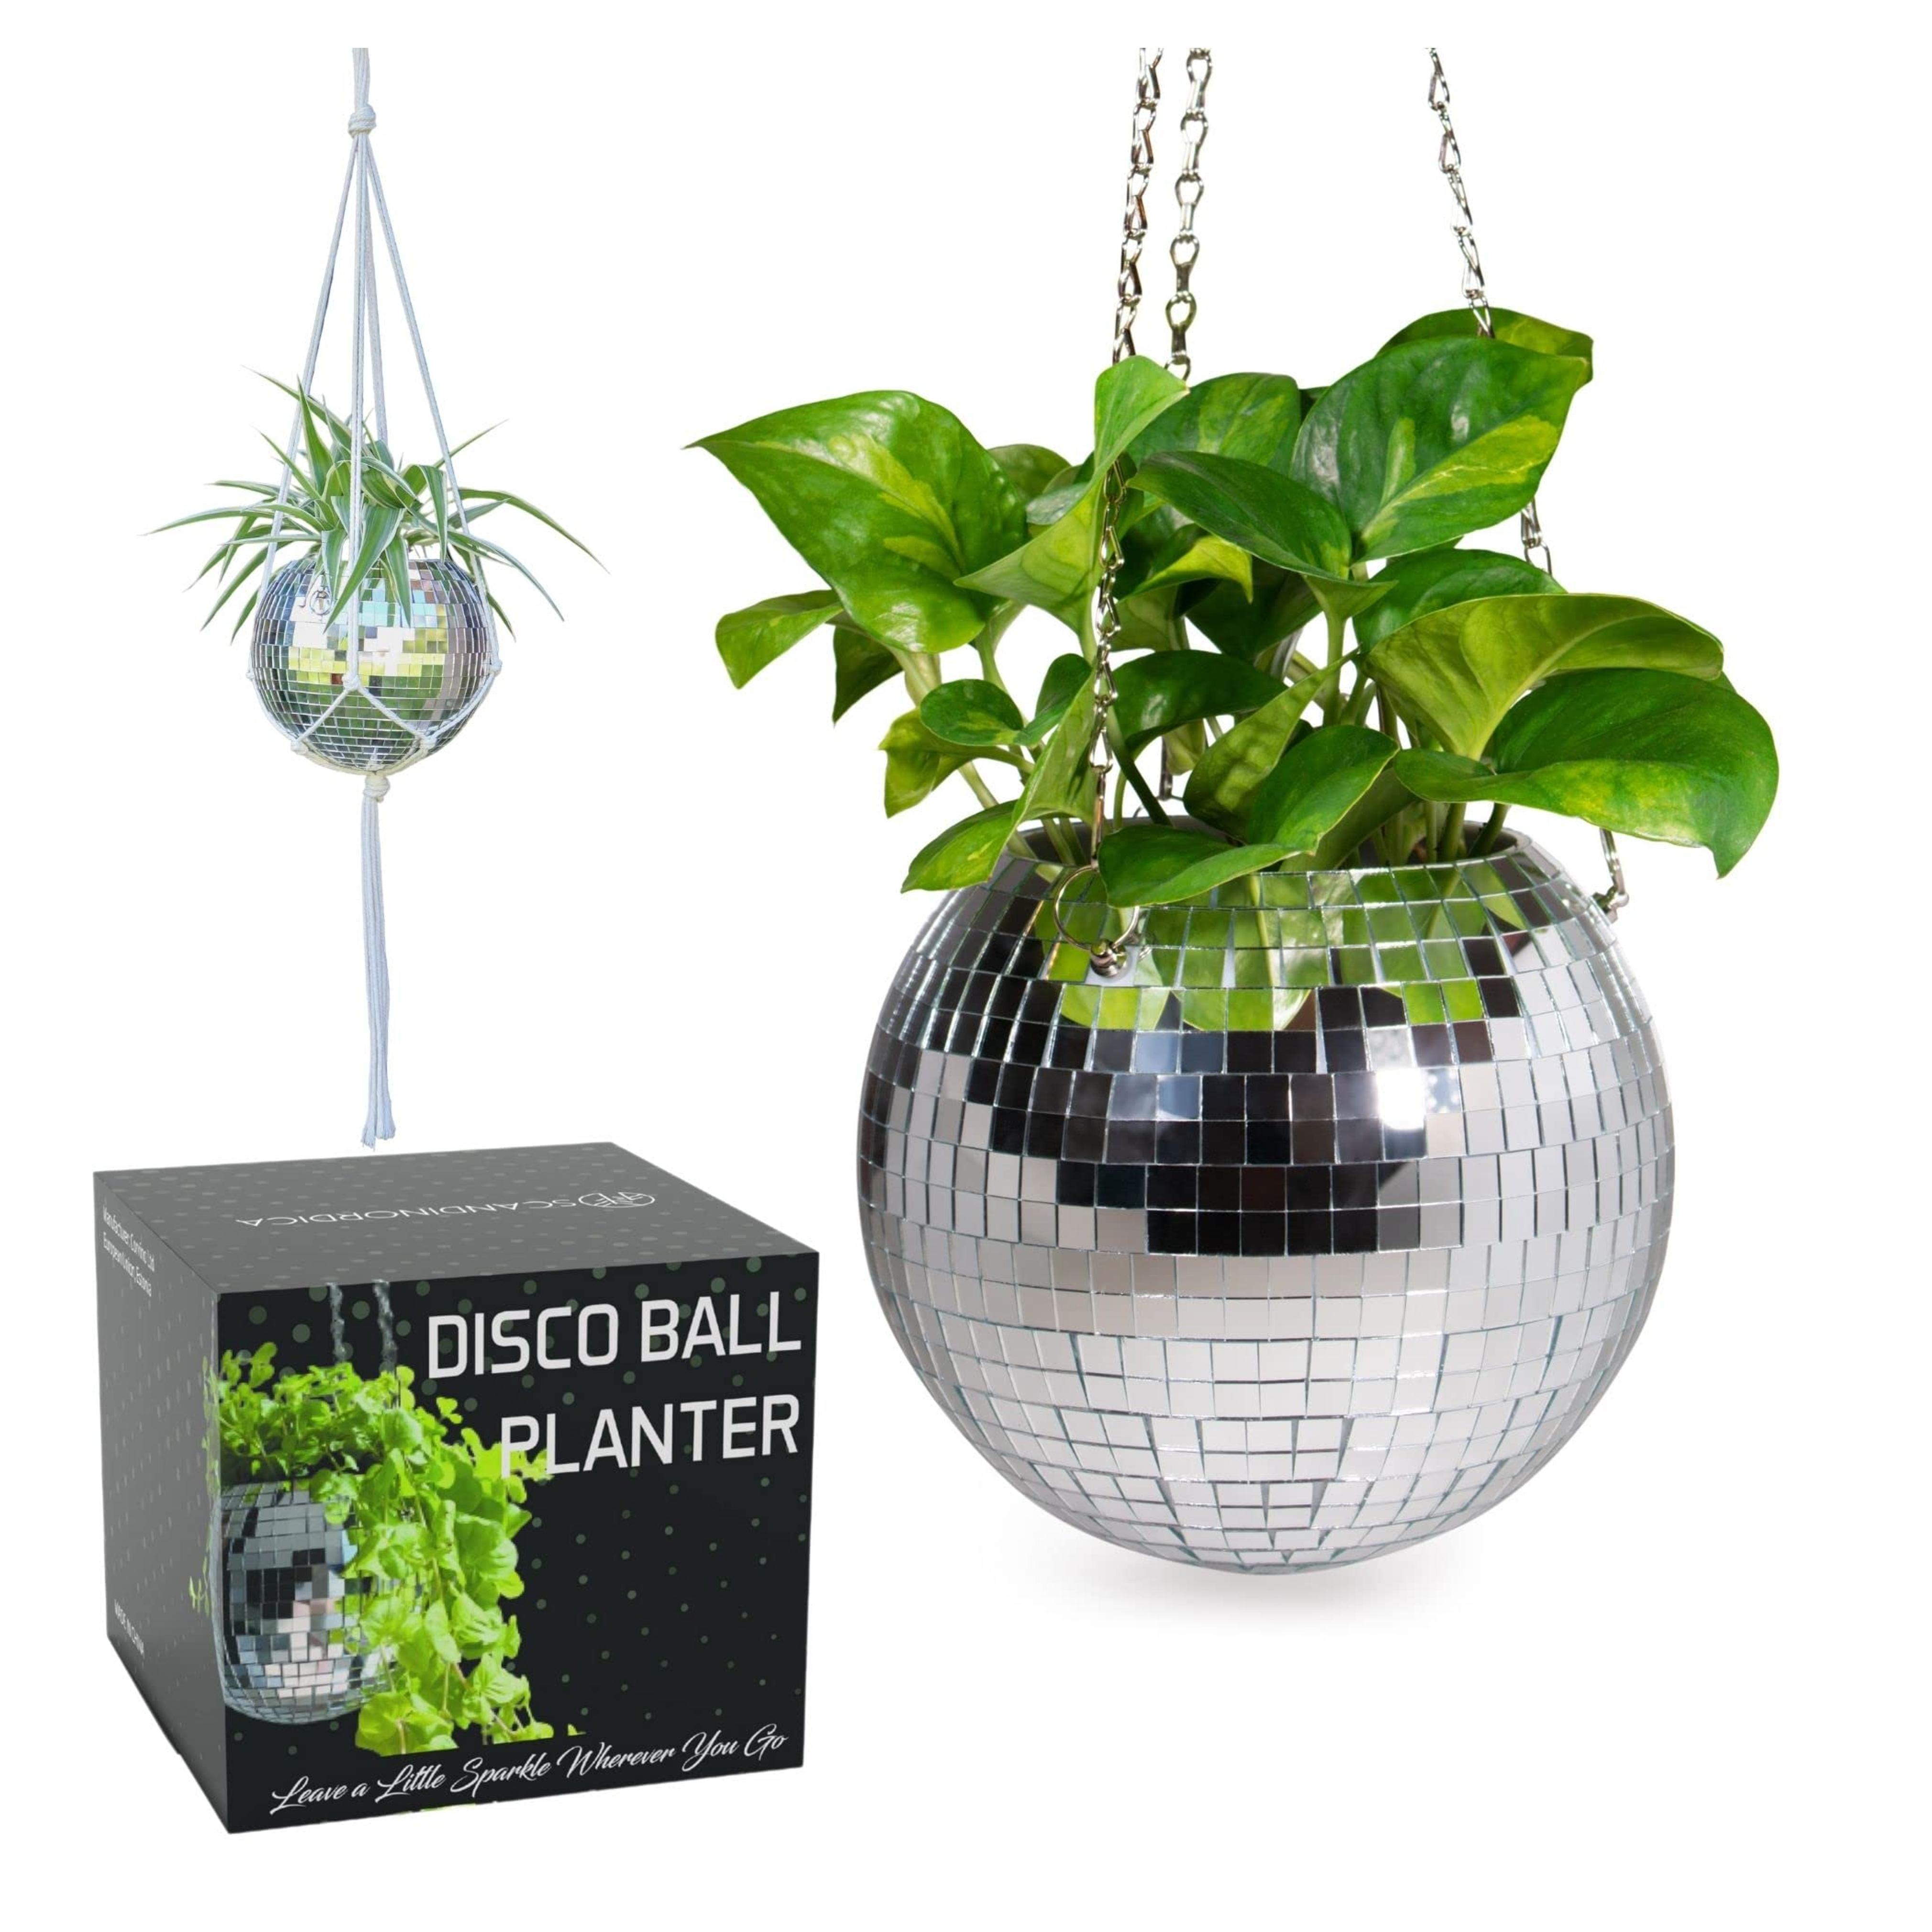 SCANDINORDICA Disco Ball Planter – Disco Ball Plant Hanger, Mirror Disco Planter with Chain and Macrame Rope, Hanging Planters for Indoor Plants | Disco Ball Decor - 8 inch Silver 8" Silver